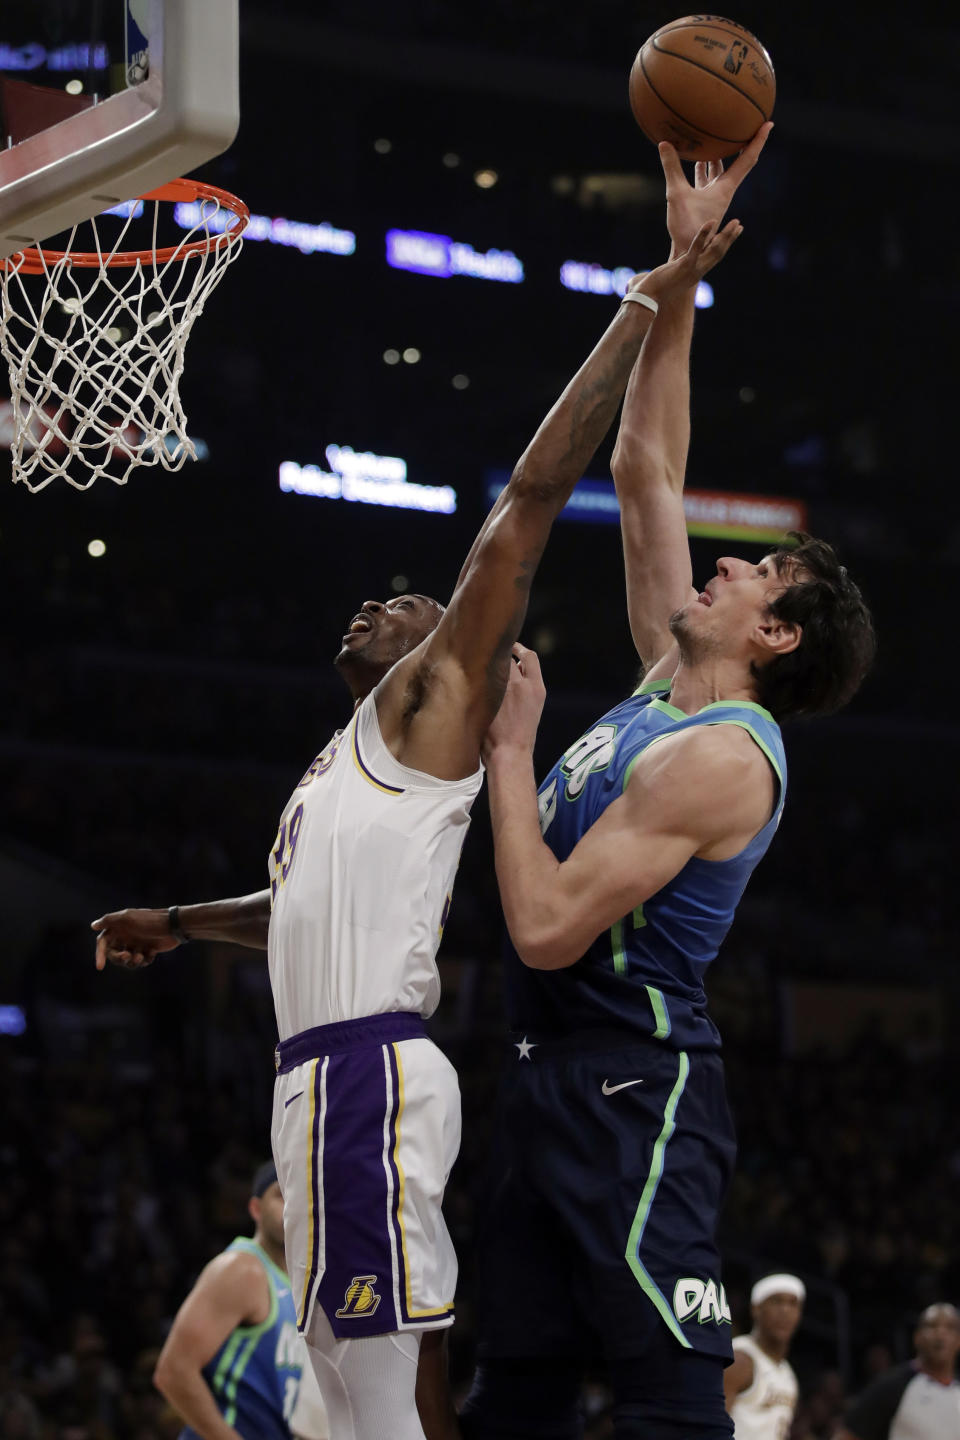 Los Angeles Lakers' Dwight Howard, left, works for a rebound against Dallas Mavericks' Boban Marjanovic during the first half of an NBA basketball game Sunday, Dec. 1, 2019, in Los Angeles. (AP Photo/Marcio Jose Sanchez)